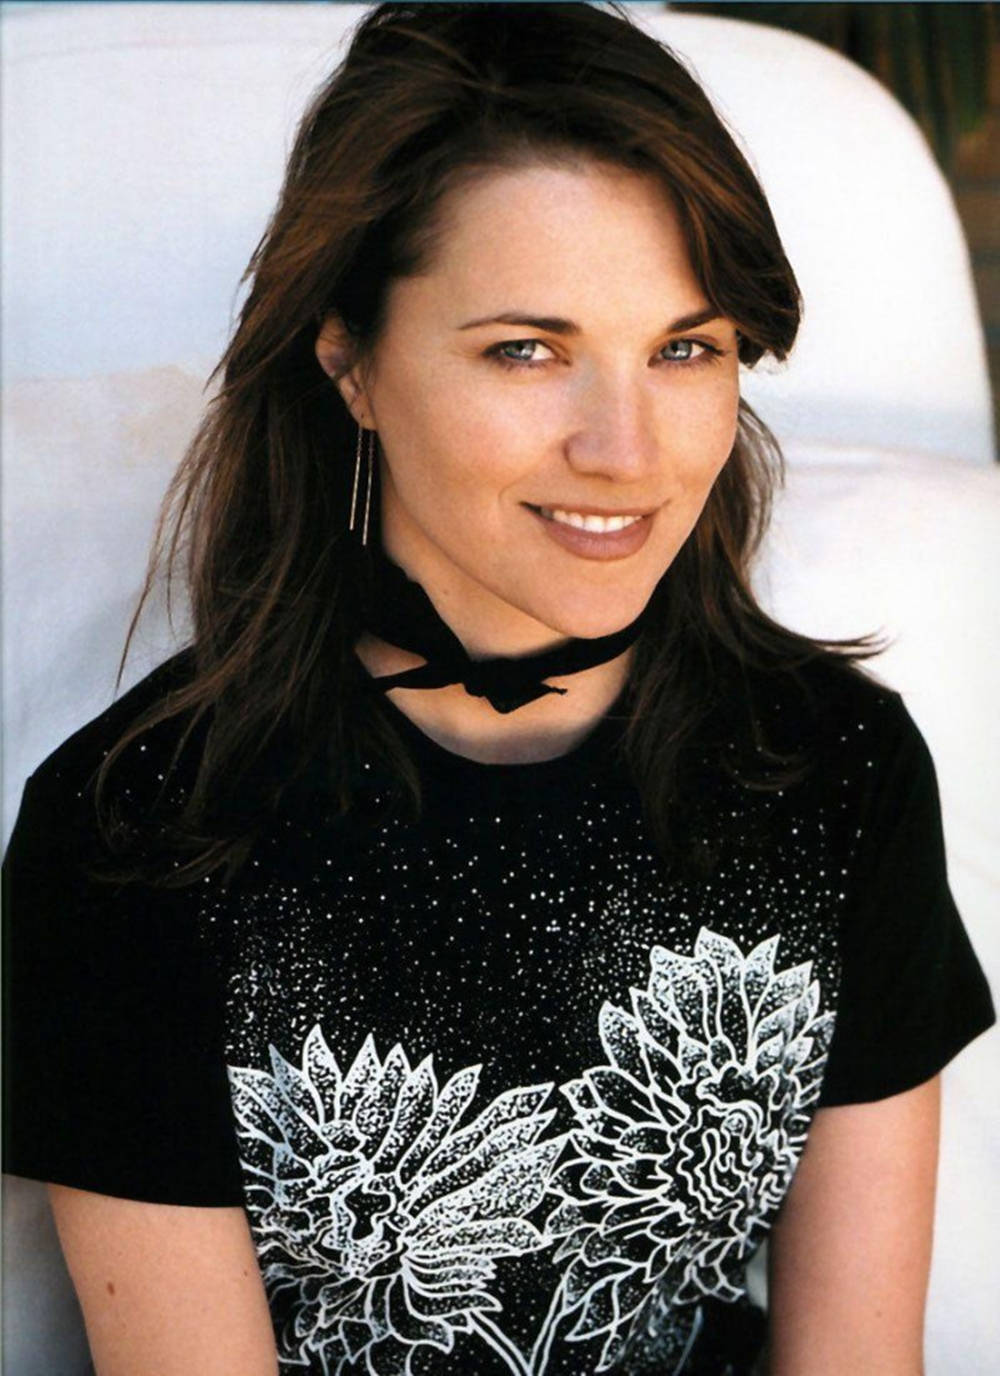 Lucylawless Bezauberndes Lächeln (lucy Lawless Charming Smile) Wallpaper